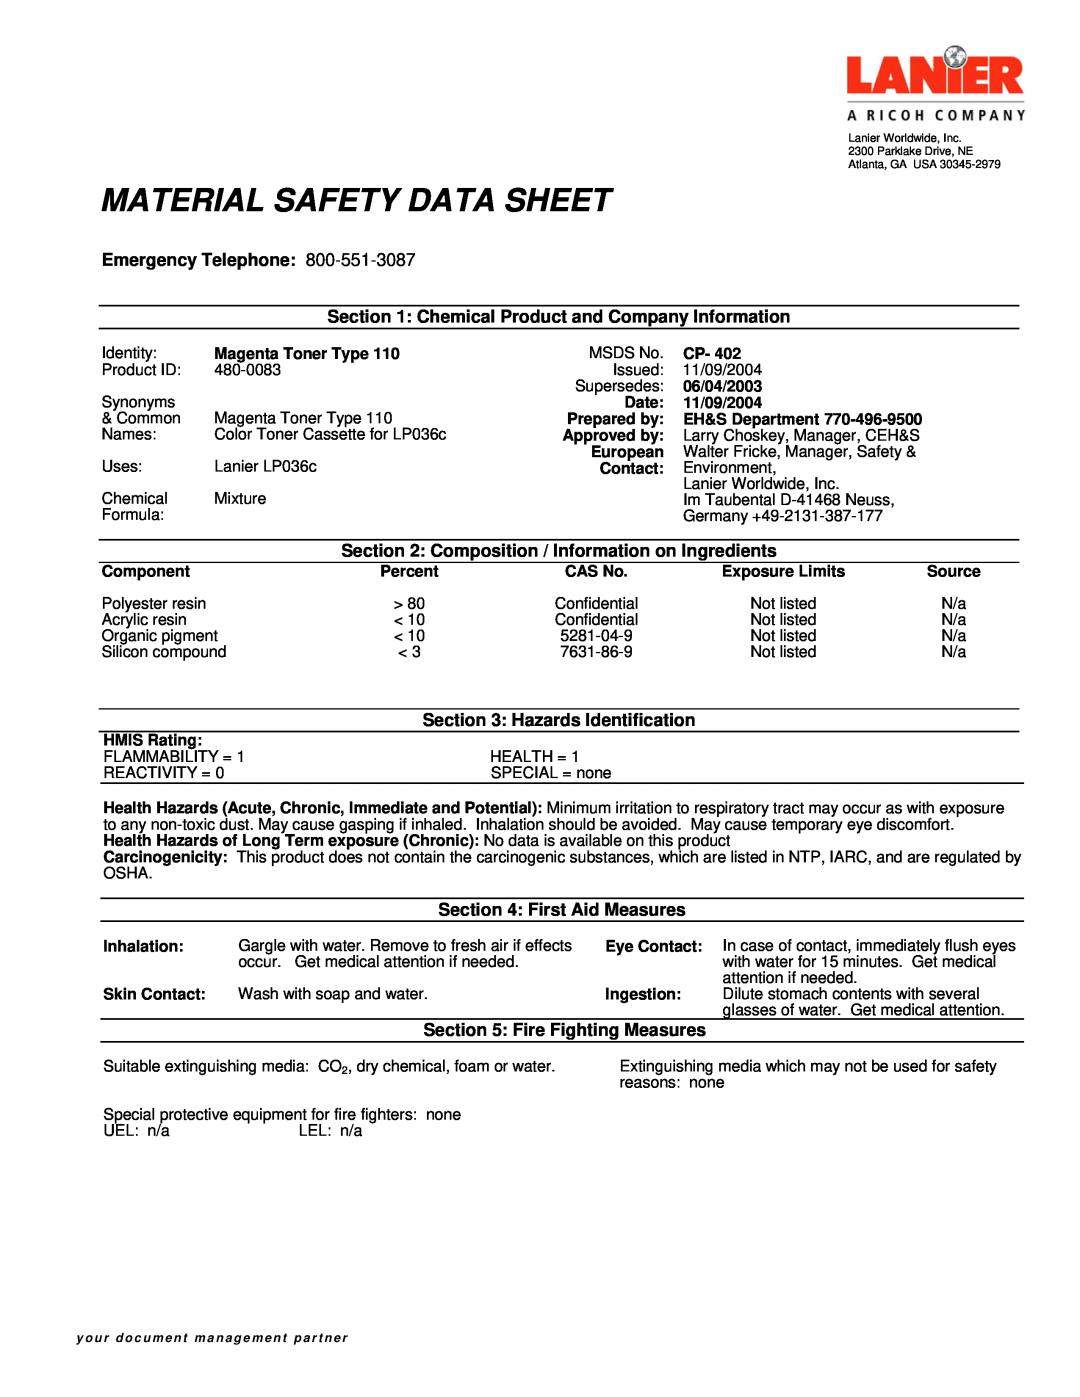 Lanier 480-0083 manual Material Safety Data Sheet, Emergency Telephone, Hazards Identification, First Aid Measures 